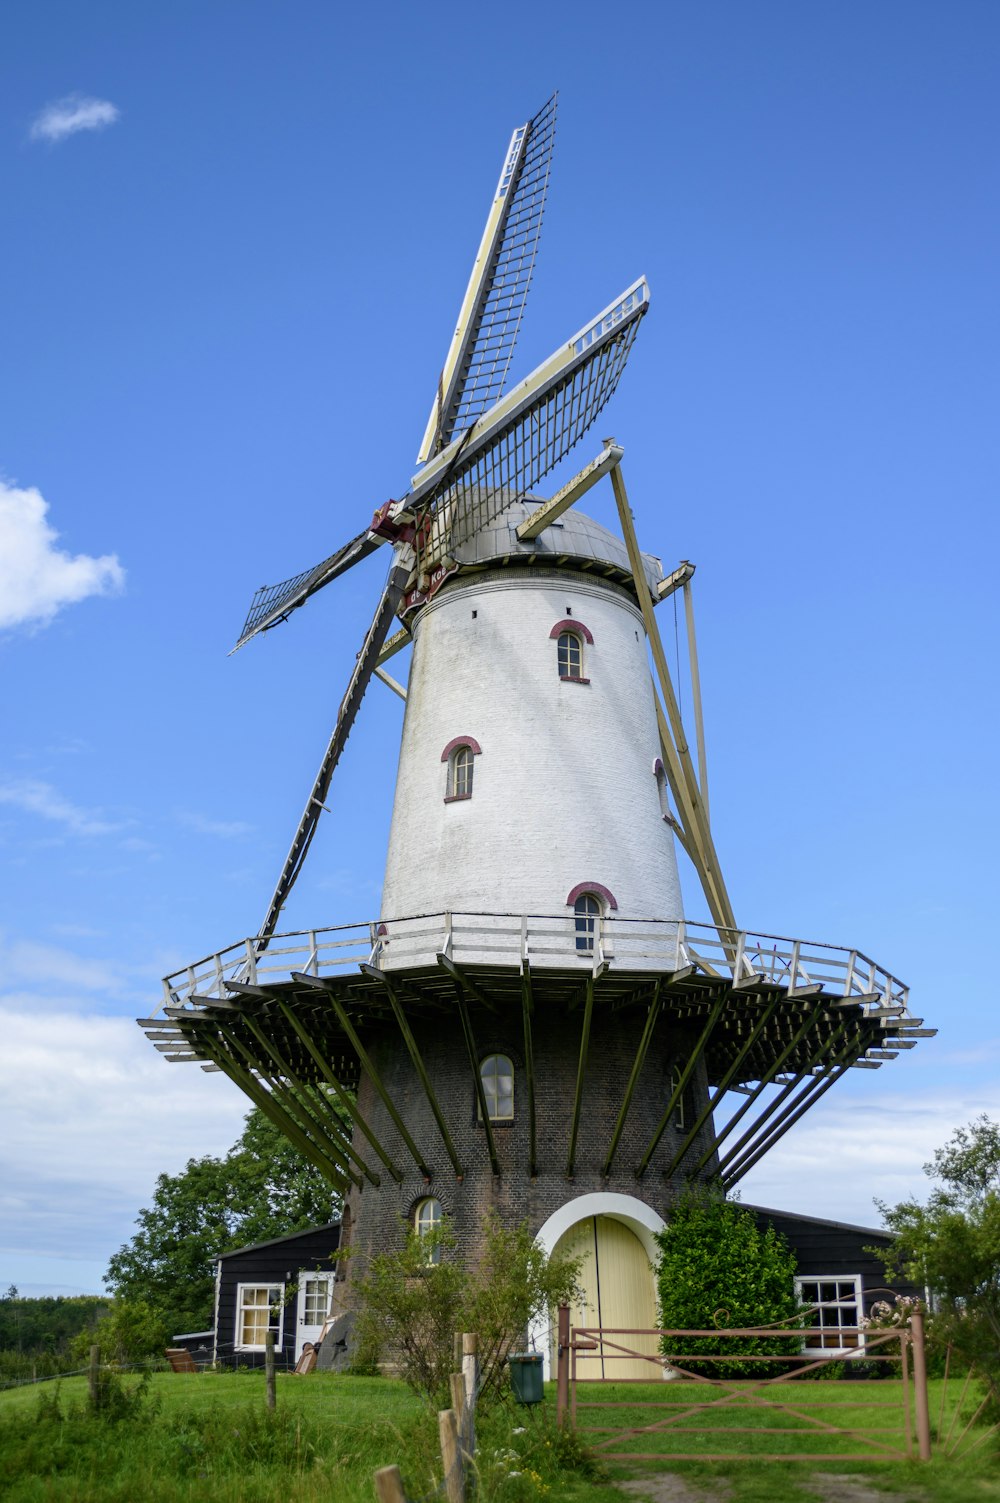 white and black windmill under blue sky during daytime